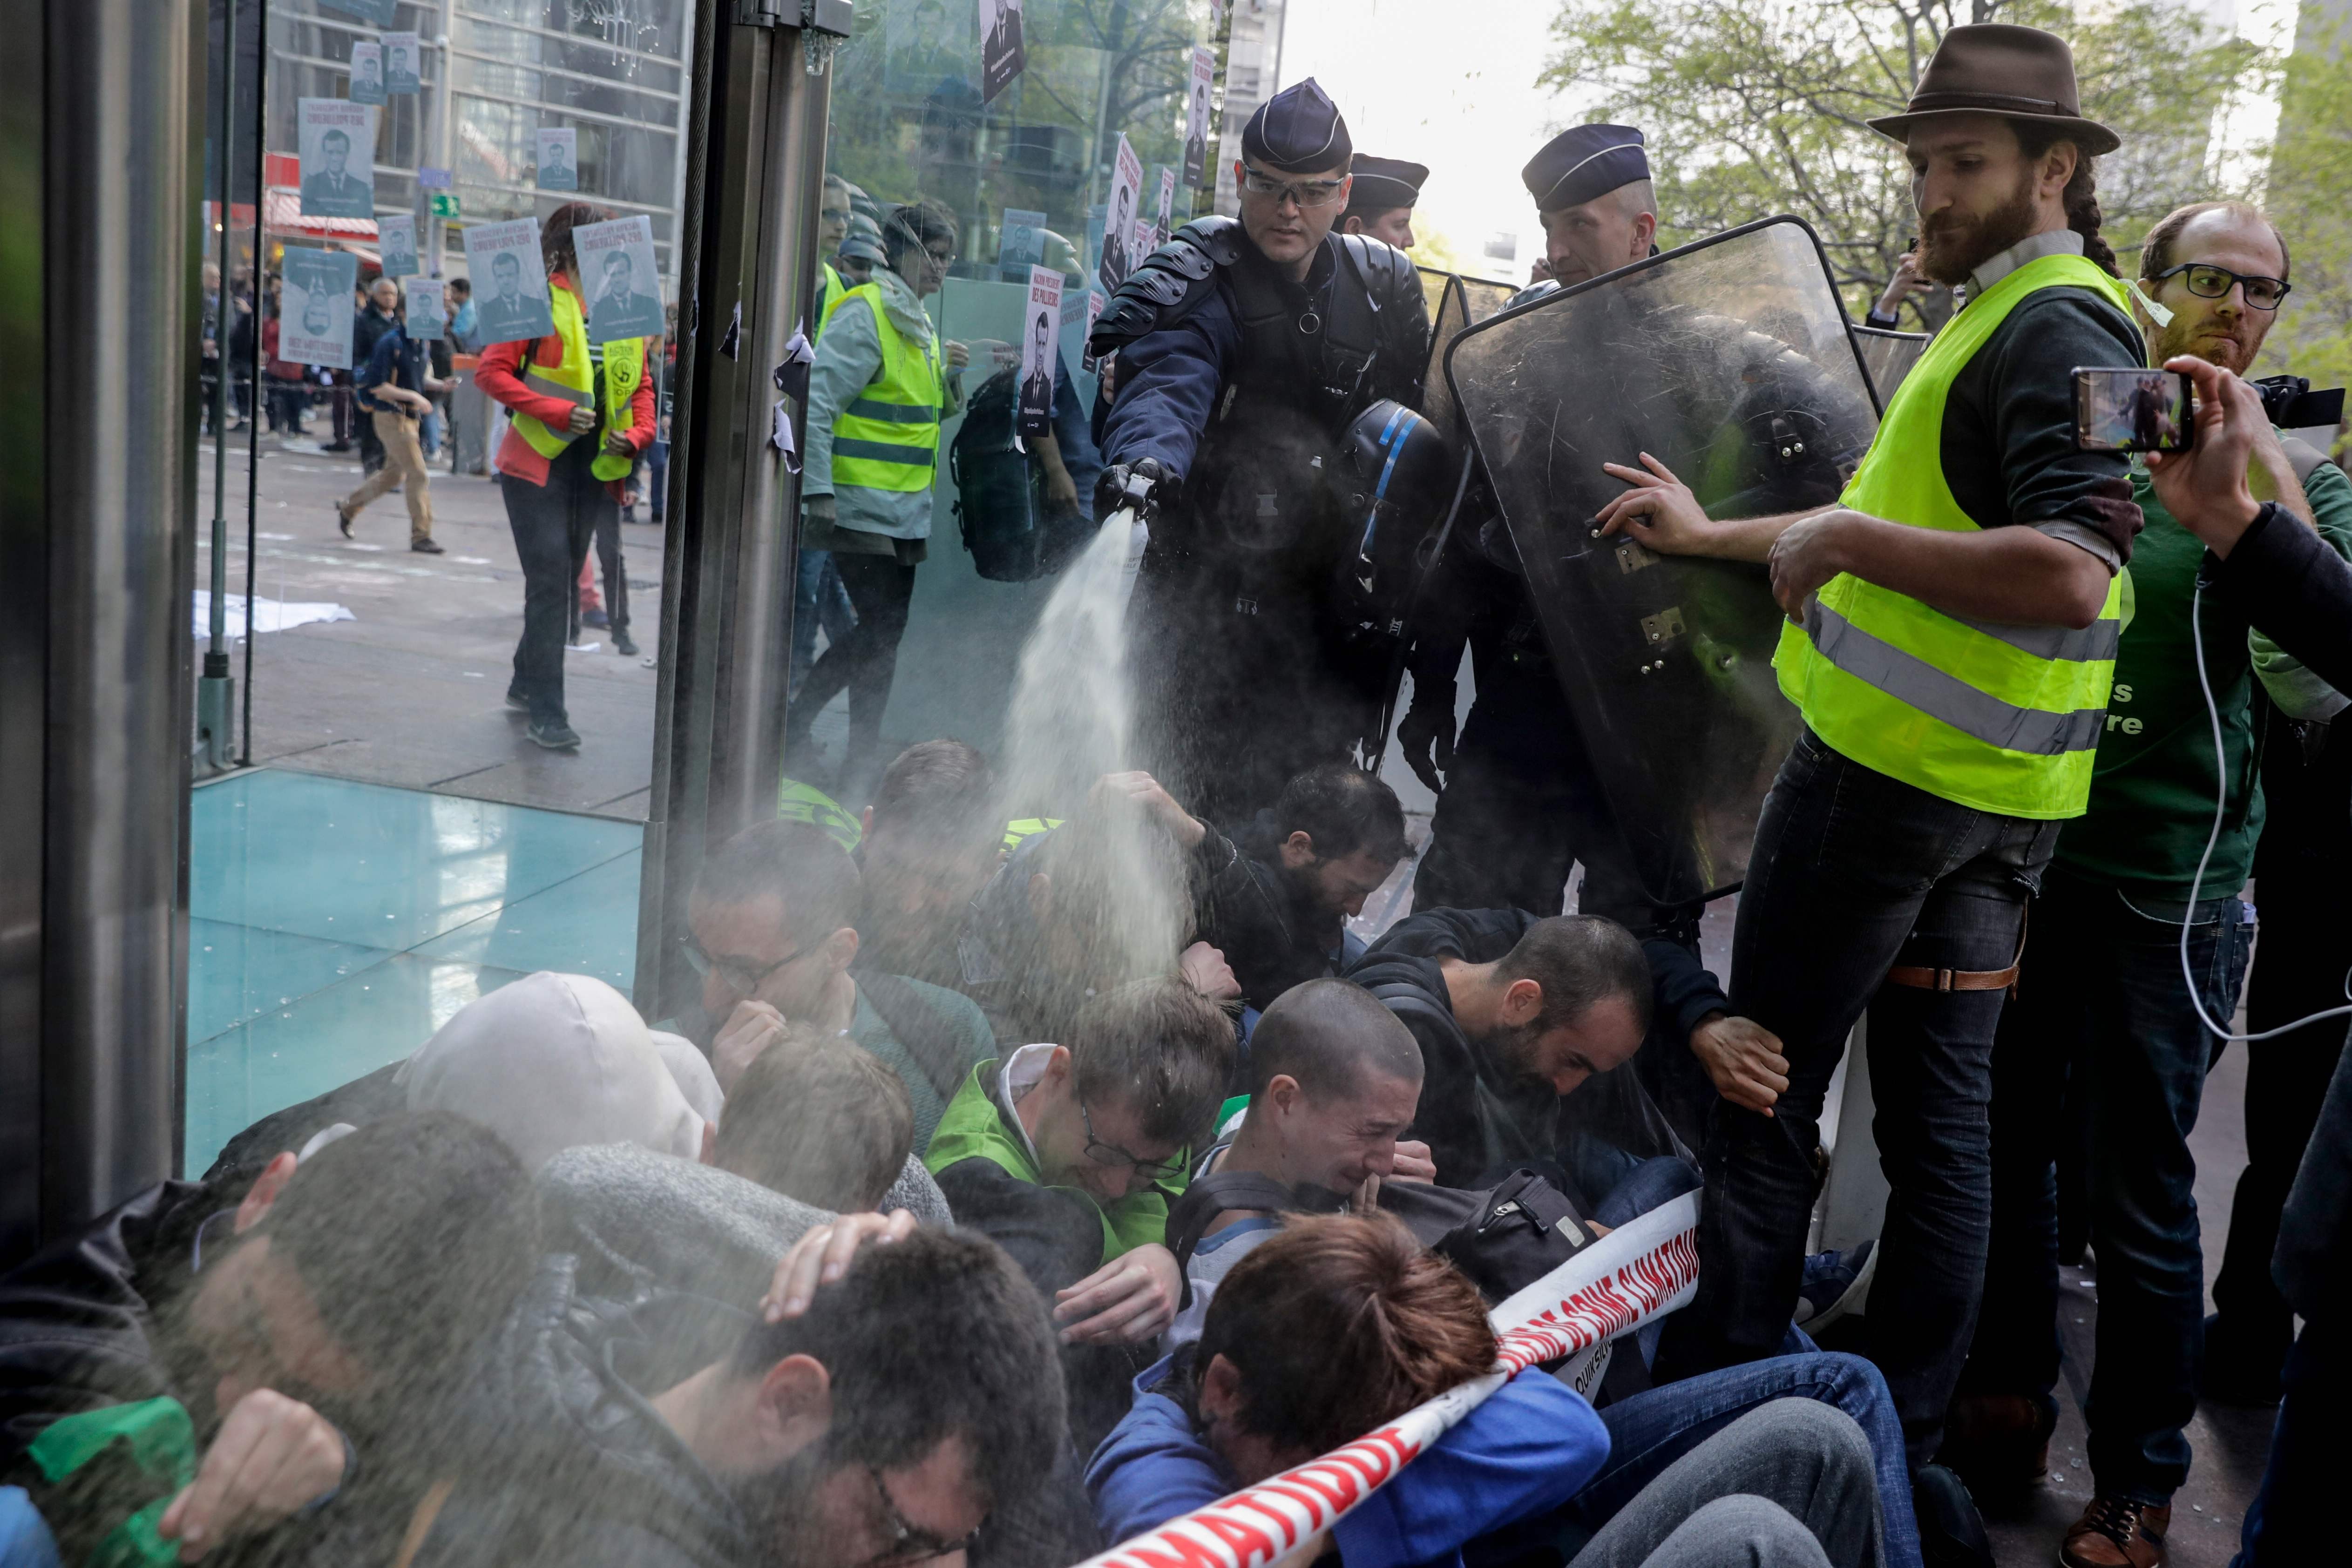 French police use pepper spray at close range on climate change activists blocking the entrance of the Societe Generale bank headquarters near Paris, during an Extinction Rebellion demonstration on April 19. Photo: AFP